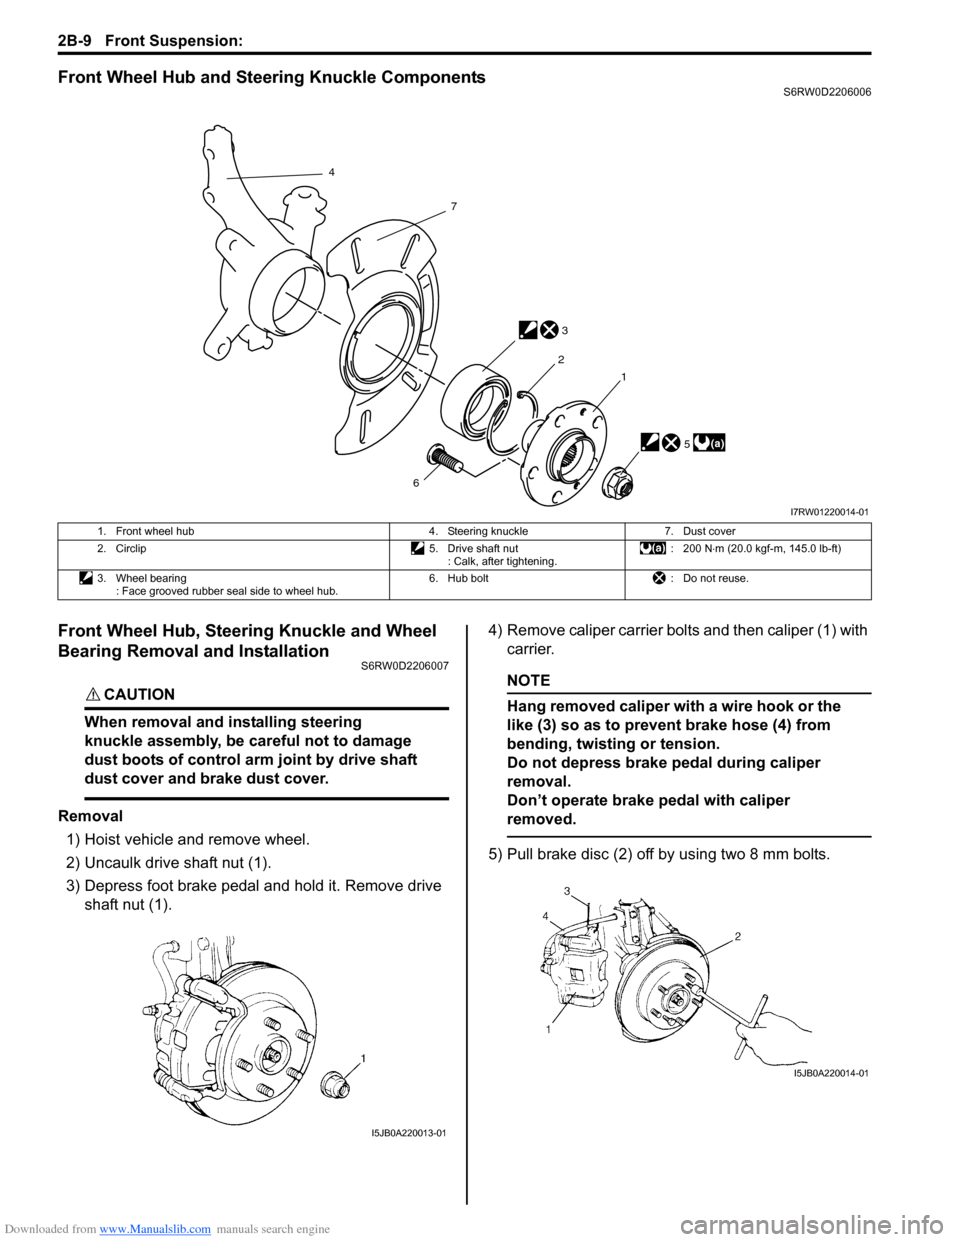 SUZUKI SX4 2006 1.G Service Workshop Manual Downloaded from www.Manualslib.com manuals search engine 2B-9 Front Suspension: 
Front Wheel Hub and Steering Knuckle ComponentsS6RW0D2206006
Front Wheel Hub, Steering Knuckle and Wheel 
Bearing Remov